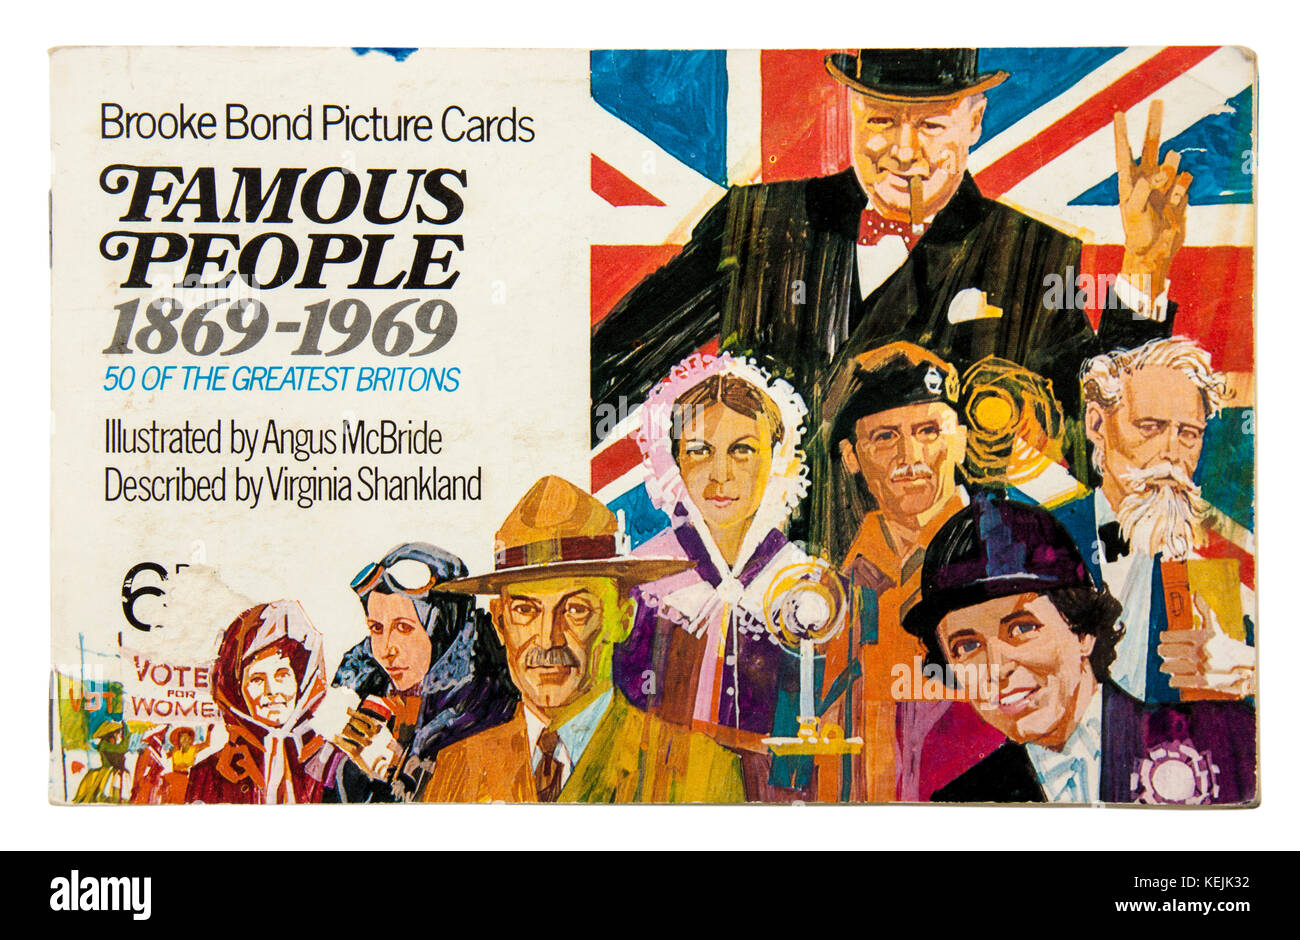 'Famous People 1869-1969' Brooke Bond Picture Cards album, published in 1969 with illustrations by Angus McBride Stock Photo